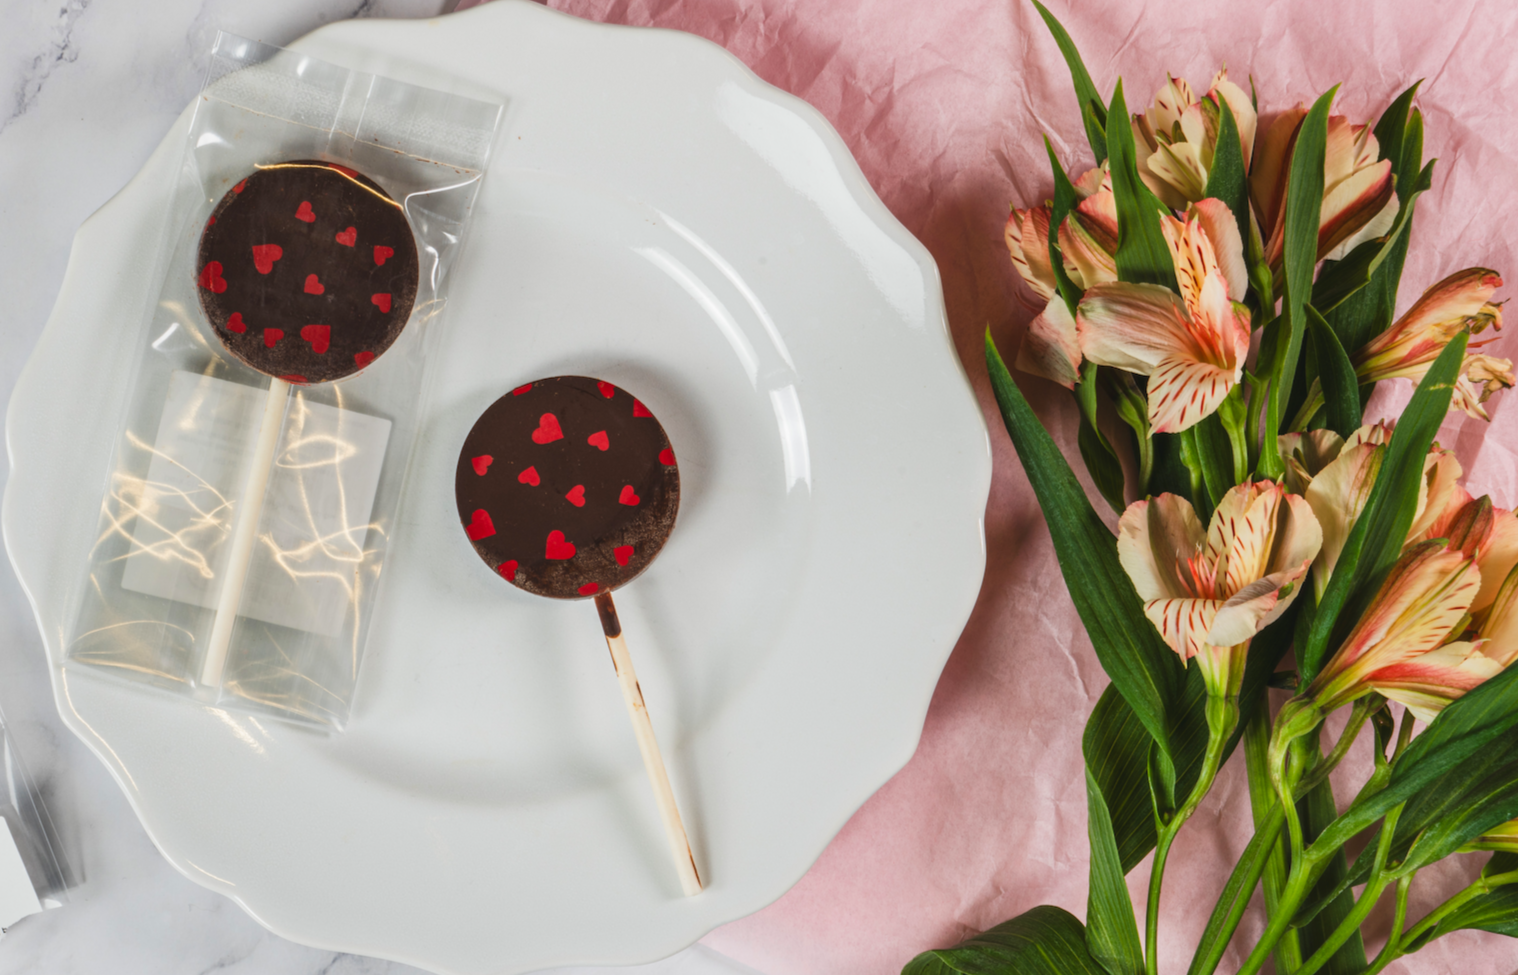 Ruby, Dark or White Chocolate Lollipops with Almond Butter Wooden Table Baking Co.